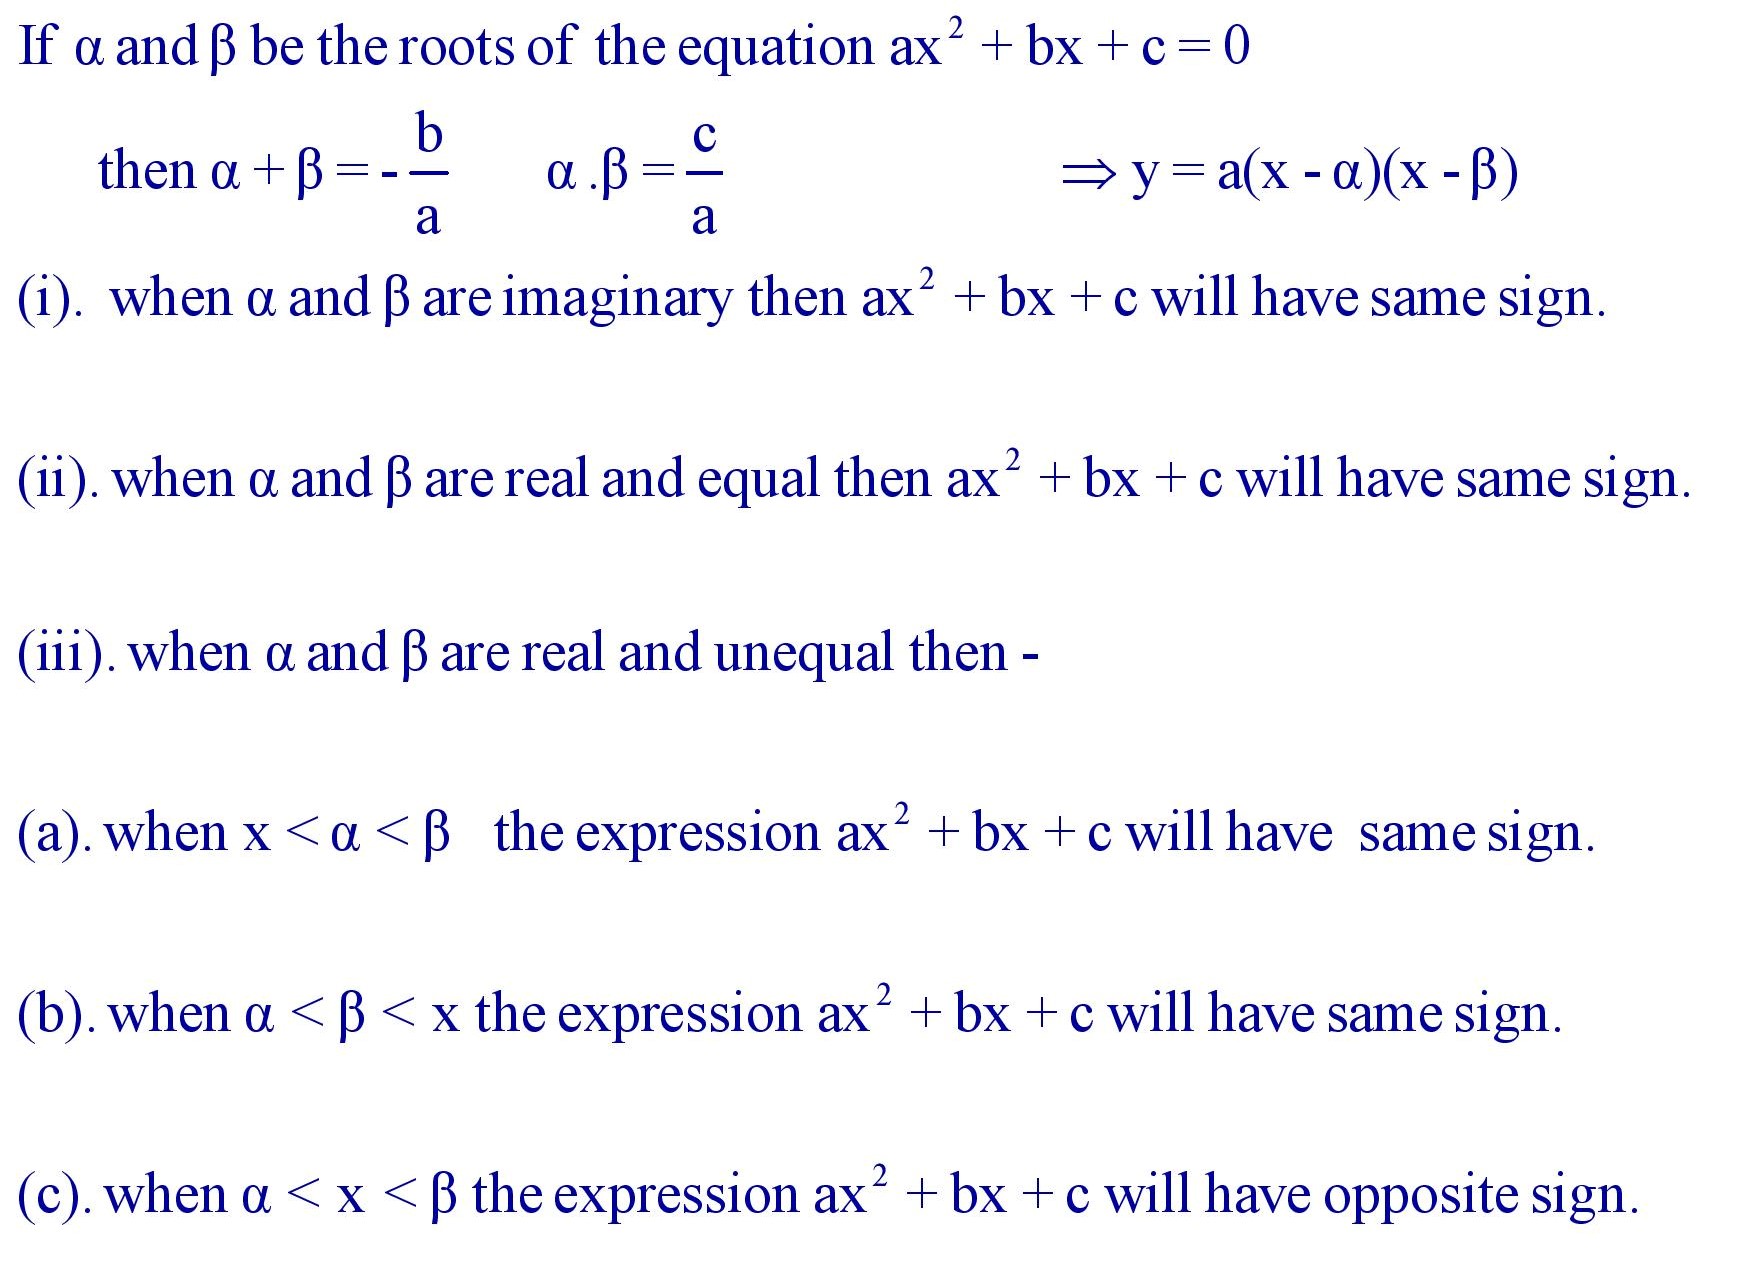 The sign of the quadratic expression ax2 + bx + c = 0 for real value of x